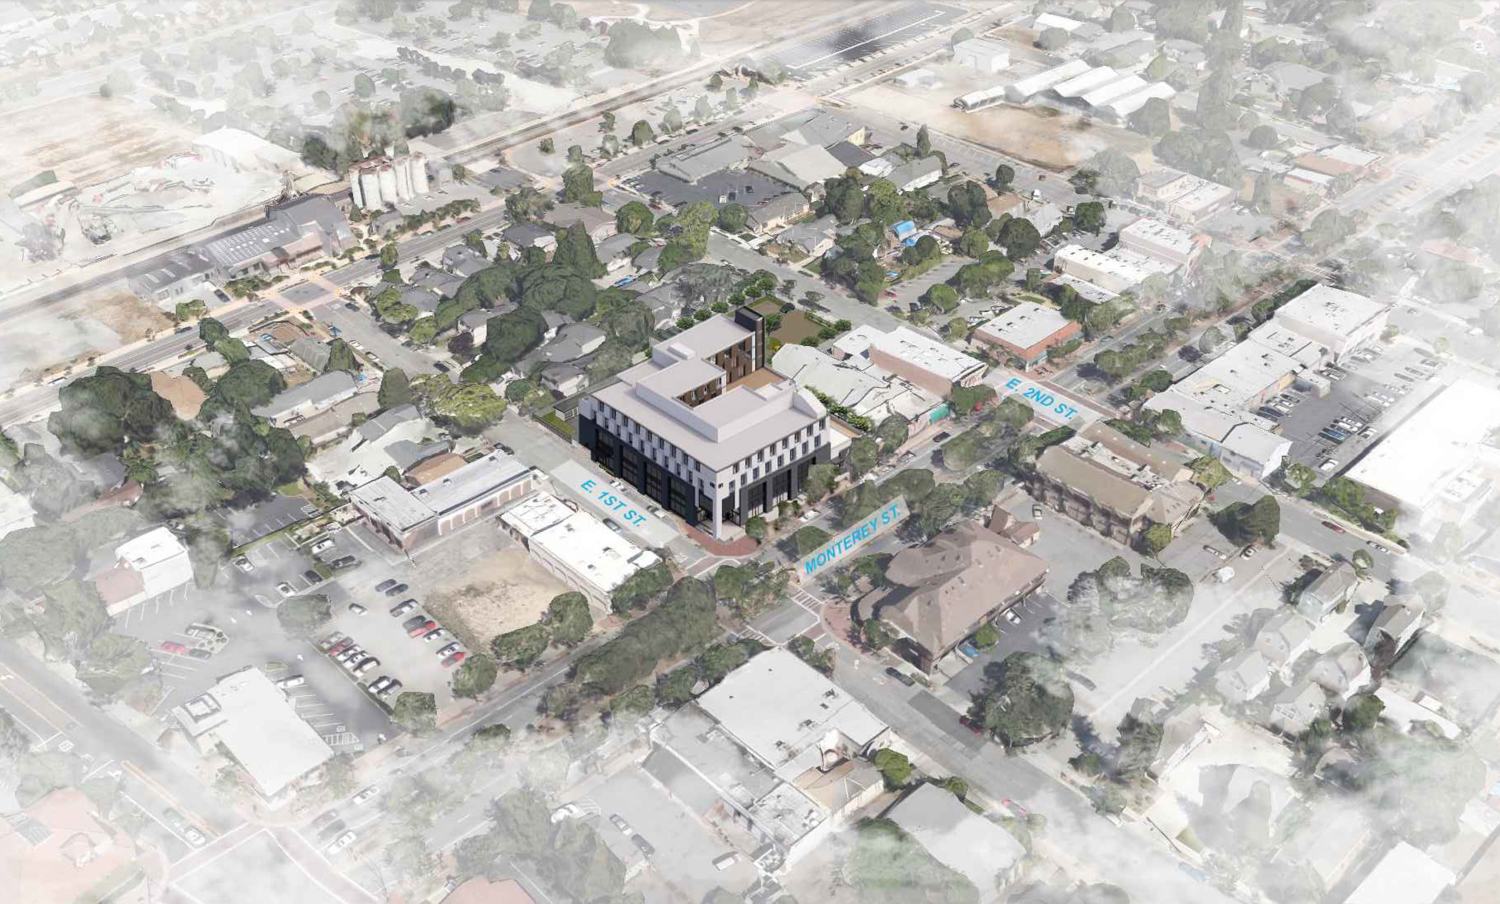 Hotel MOHI aerial view, rendering by KTGY